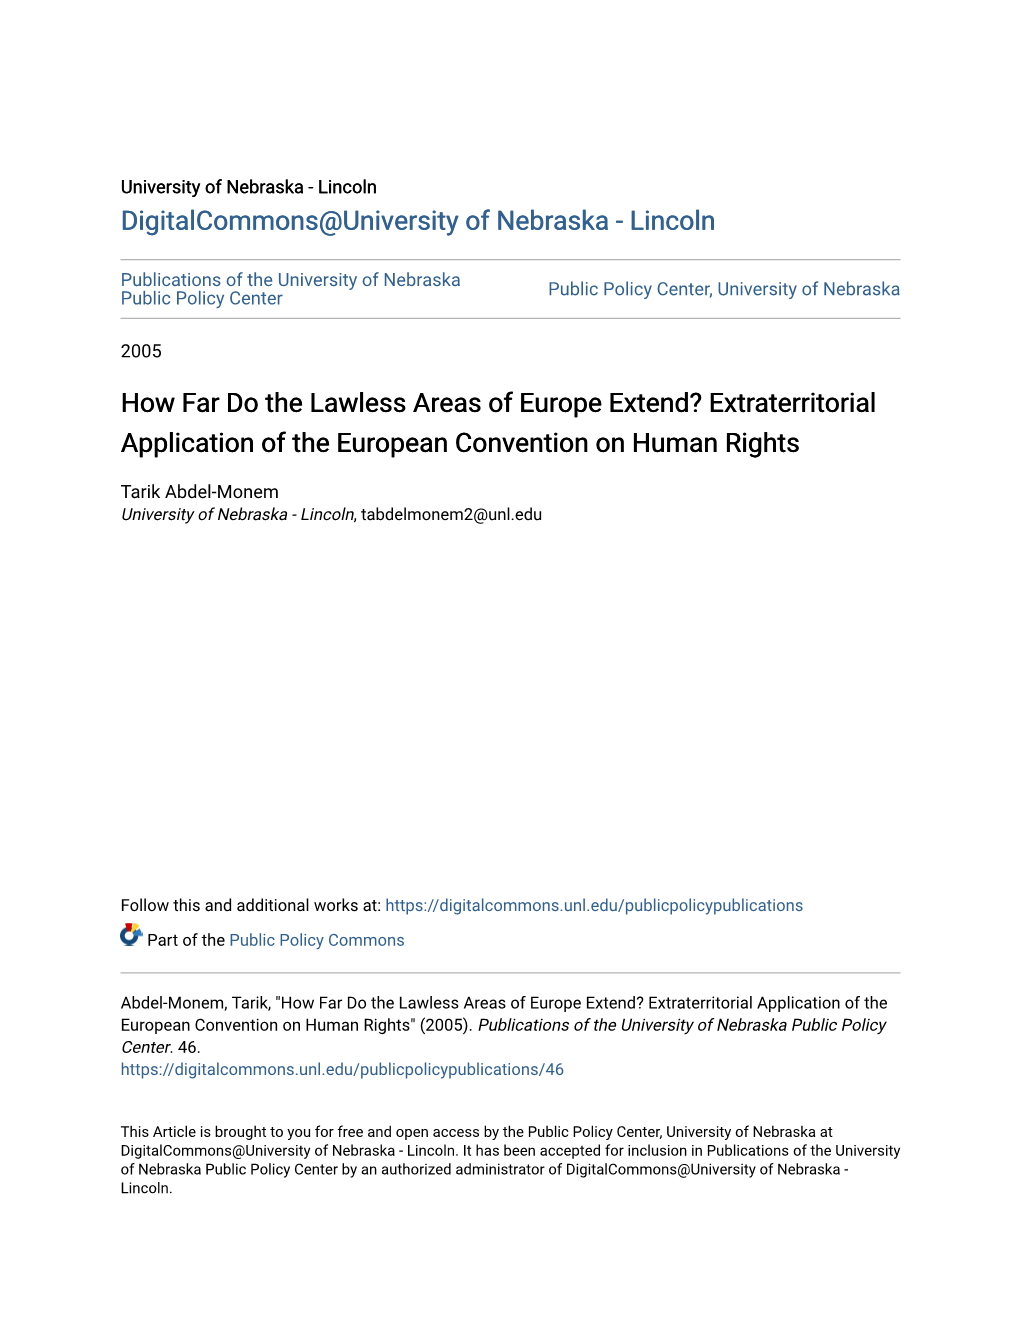 Extraterritorial Application of the European Convention on Human Rights